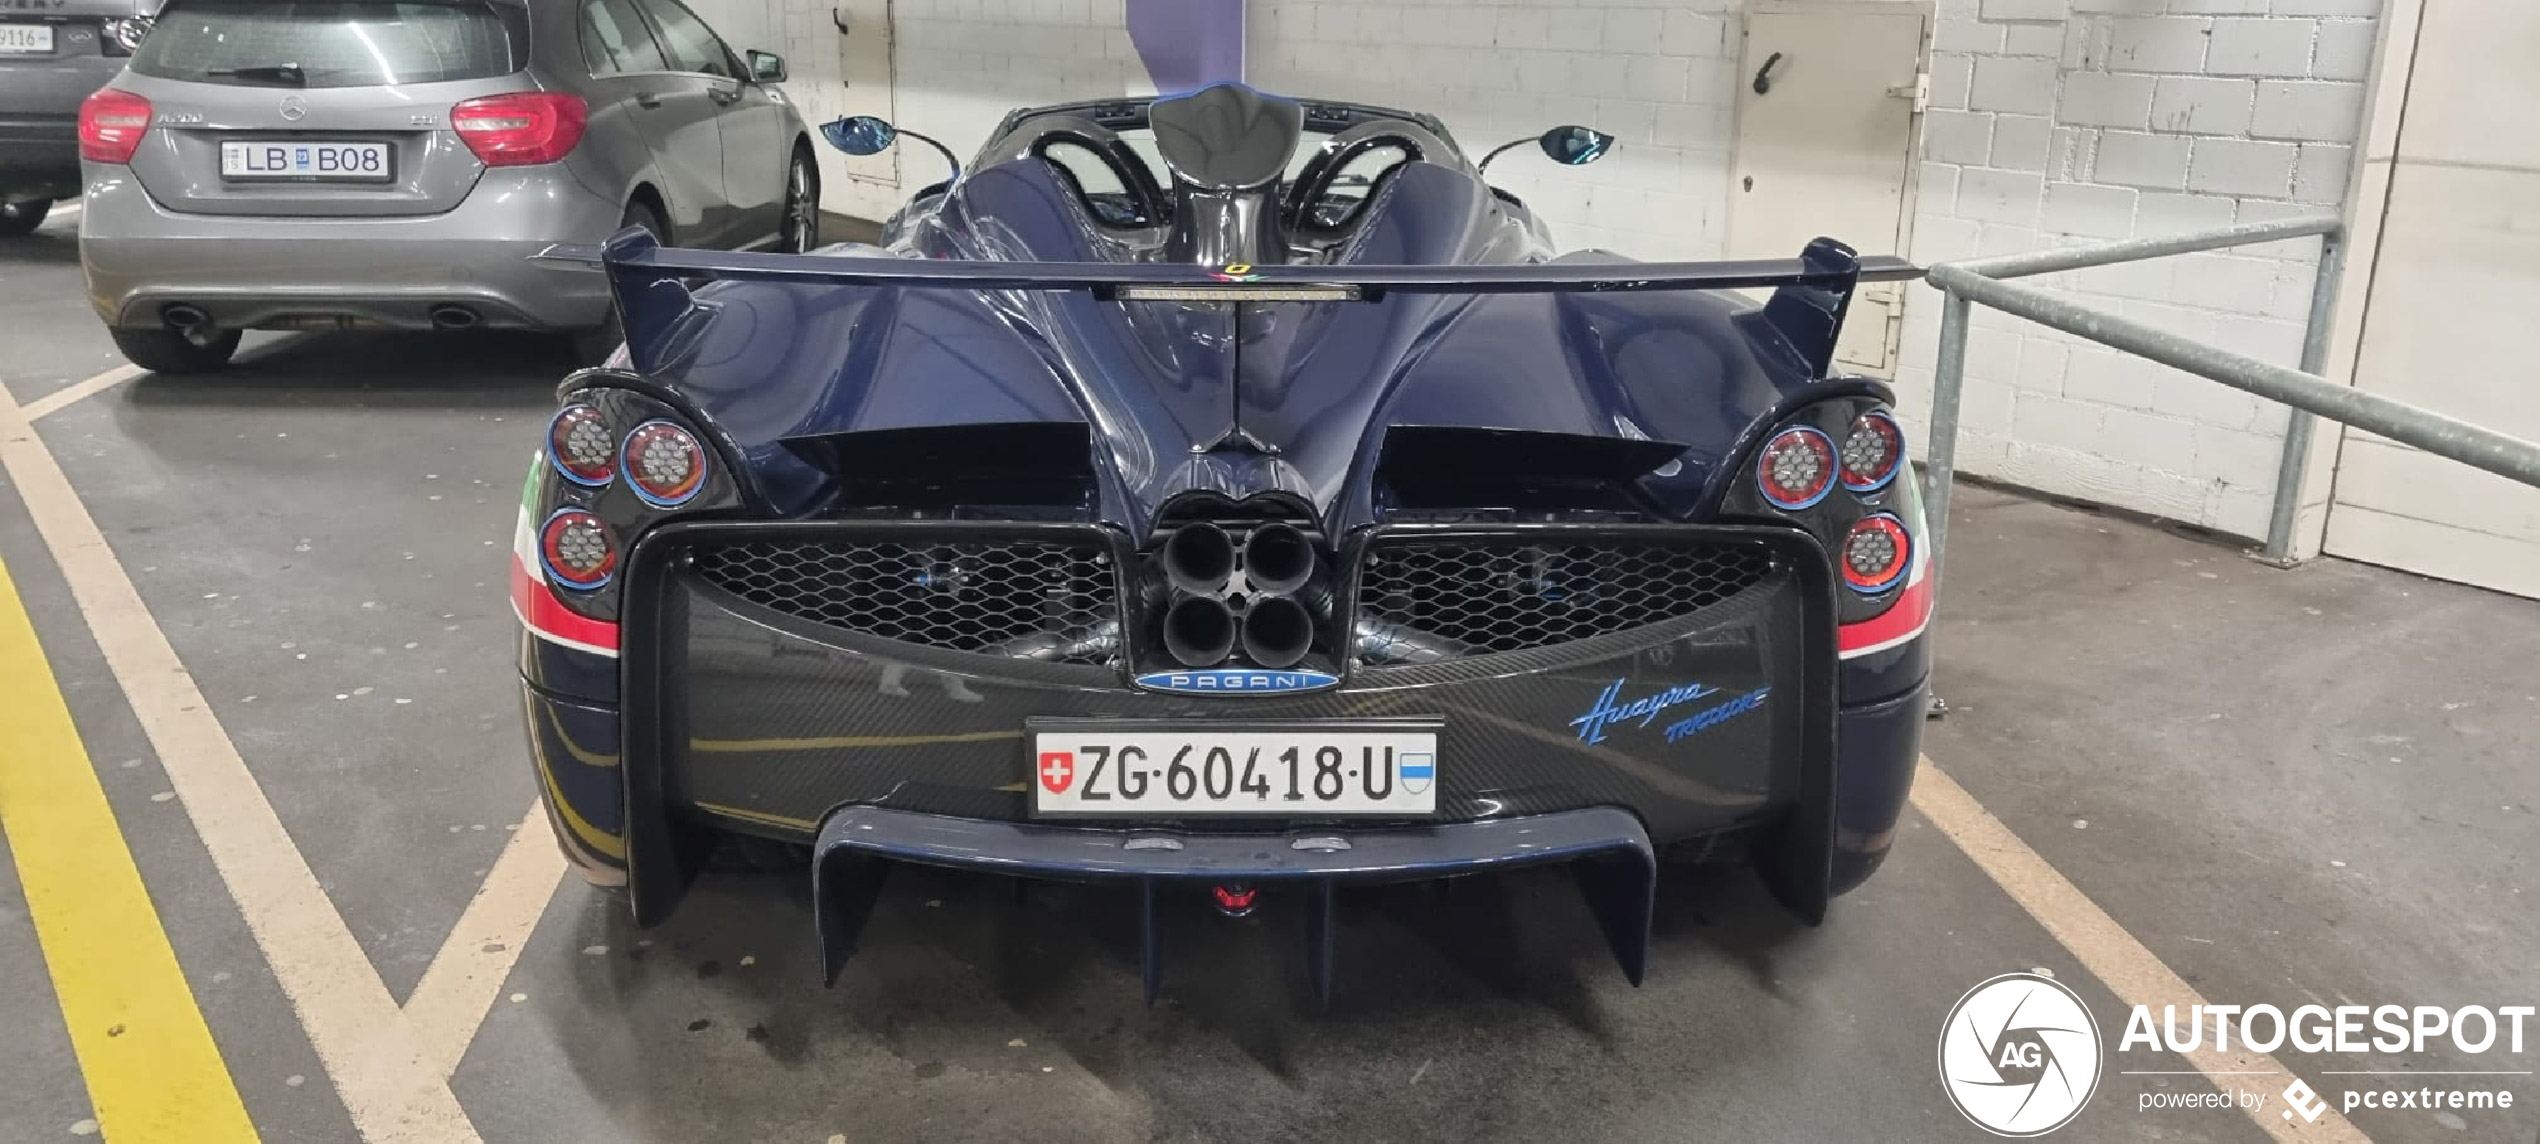 You can do groceries with the Pagani Huayra Tricolore